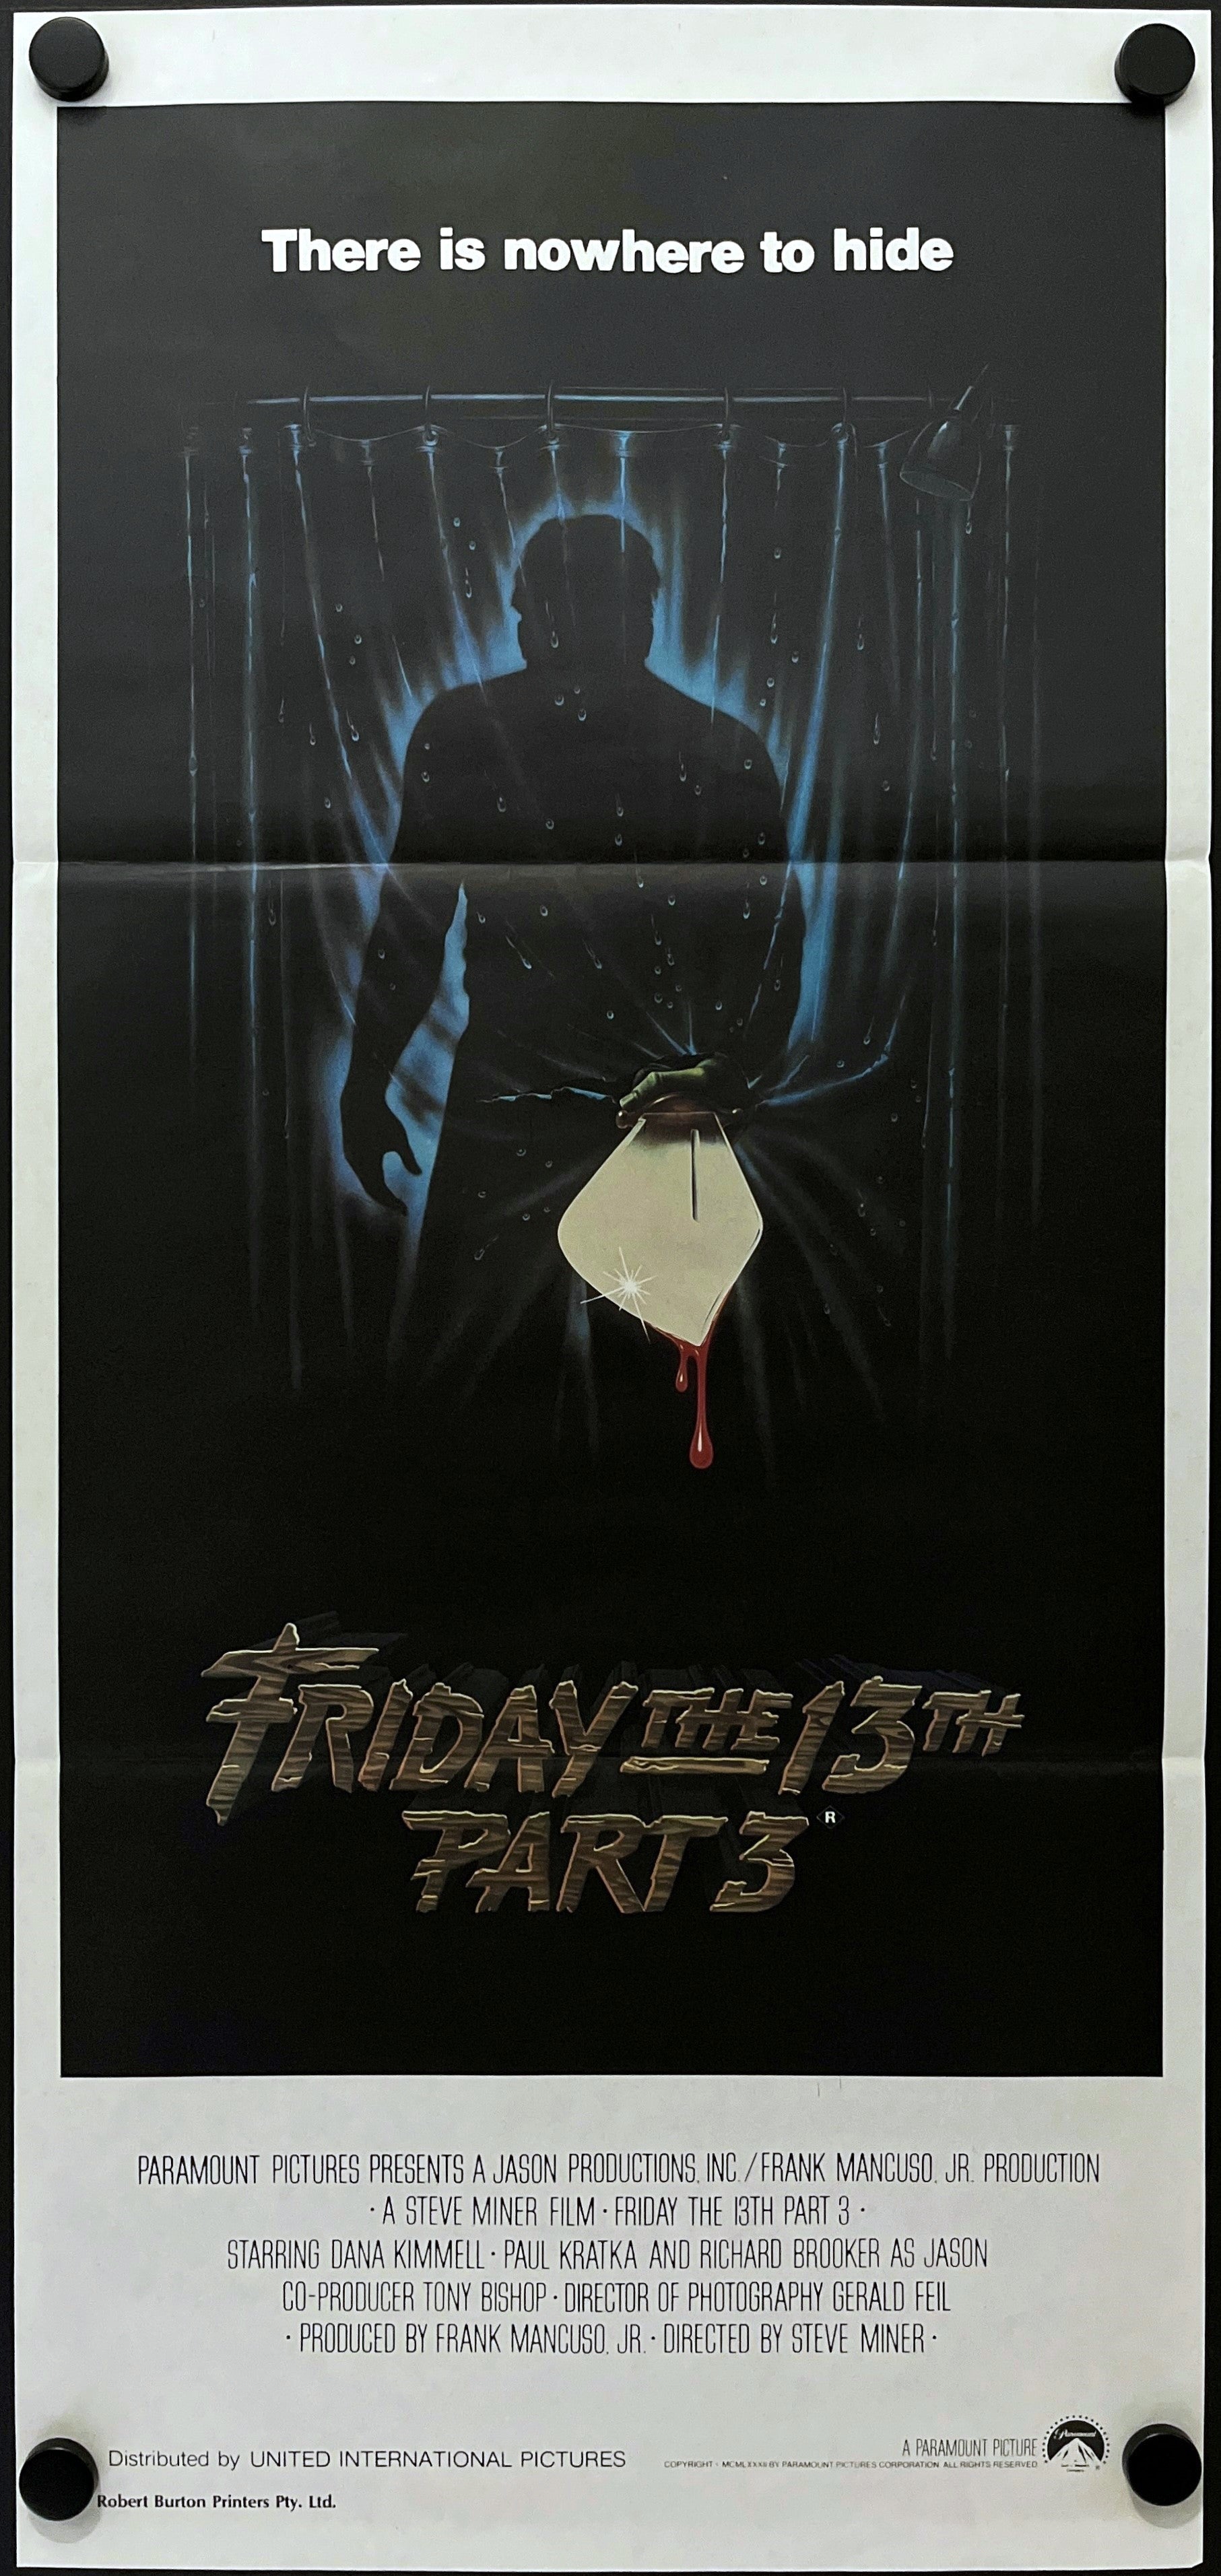 FRIDAY THE 13th: PART 3 (1982)